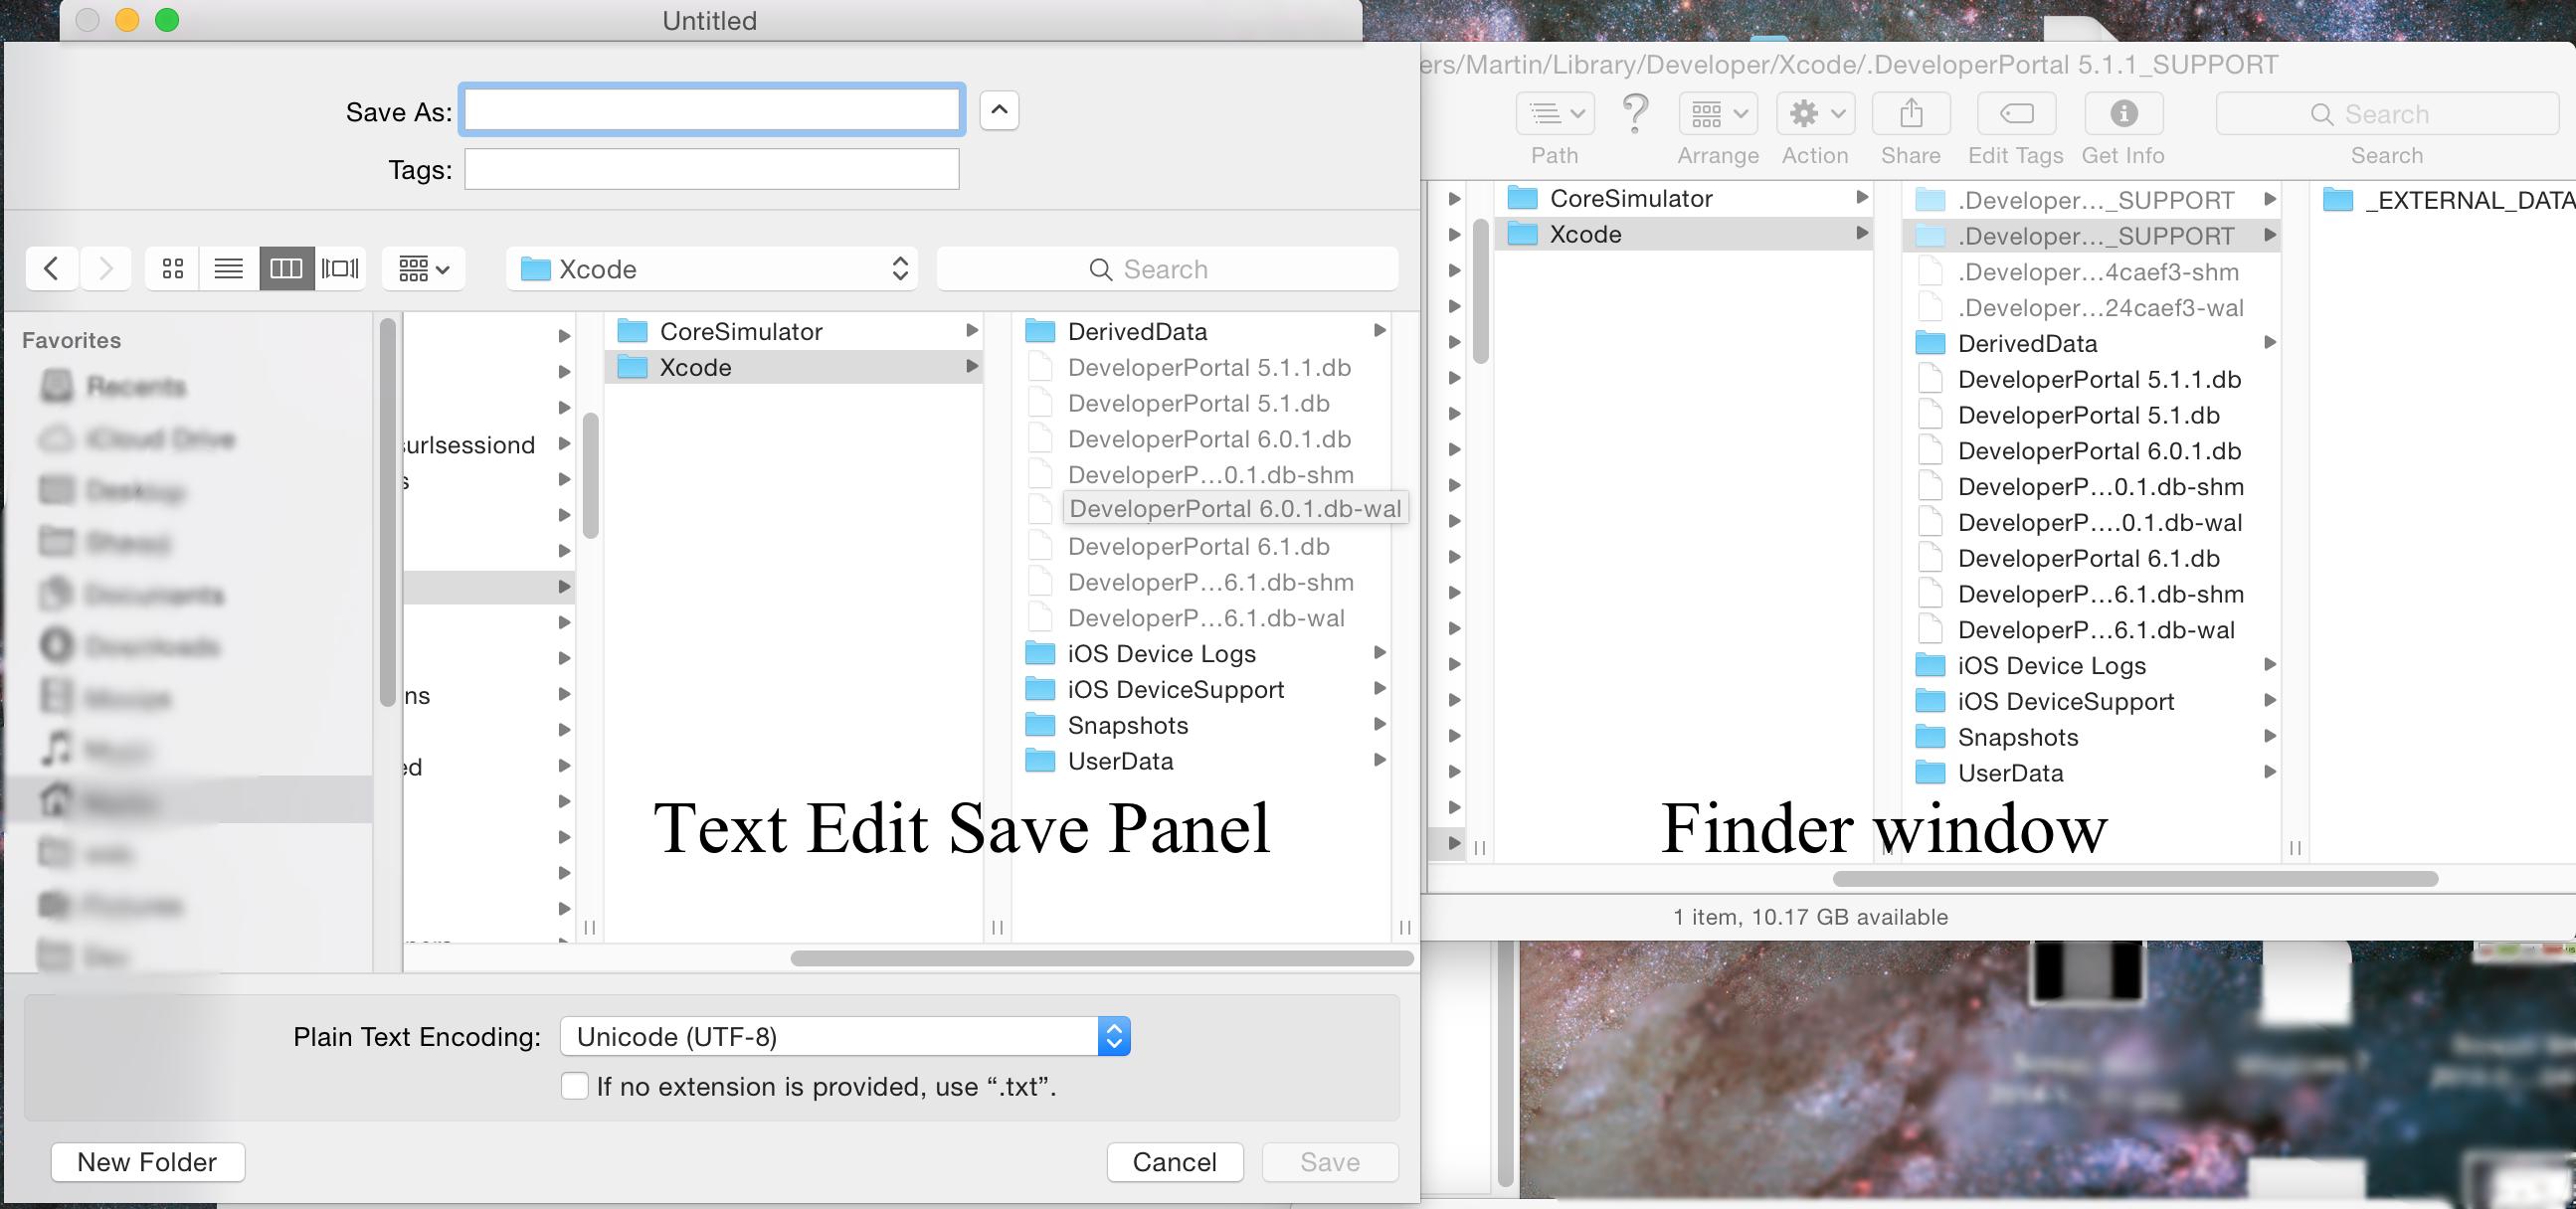 mac lost my favorites in the file viewer for saving